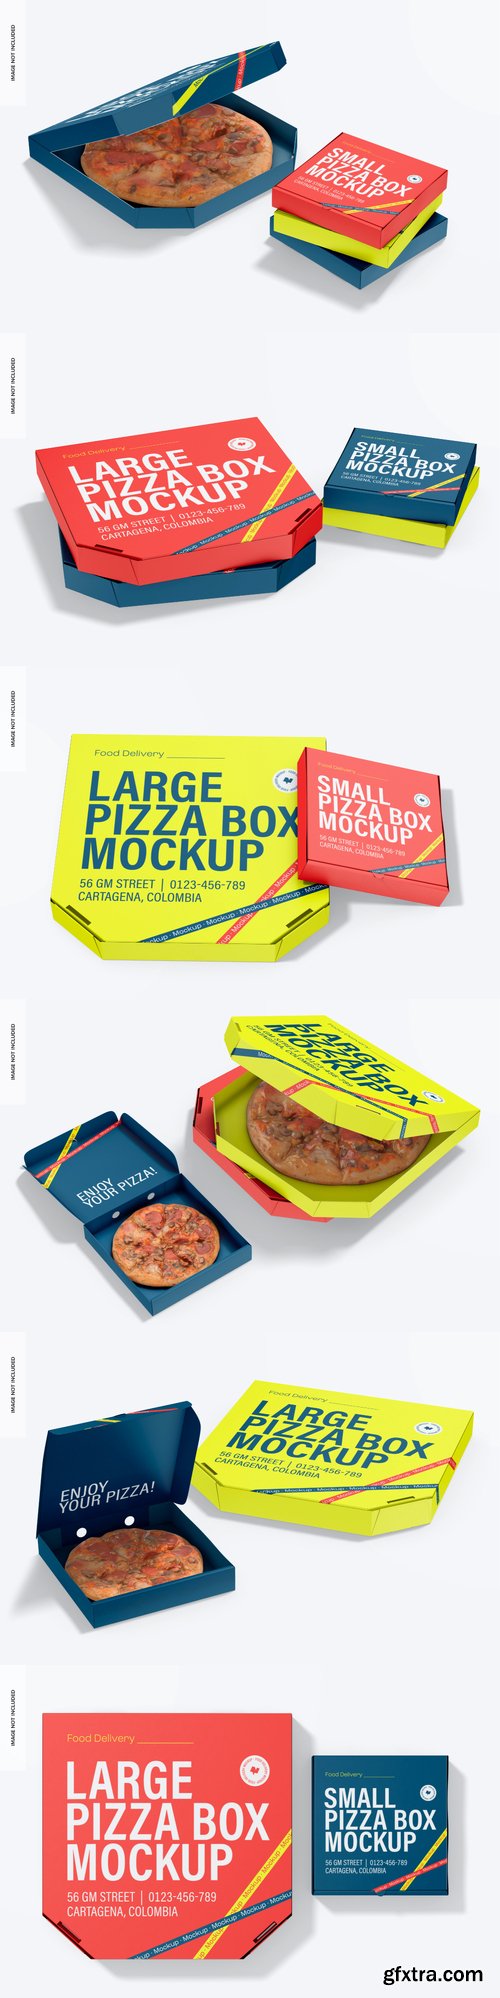 Large and small pizza boxes mockup